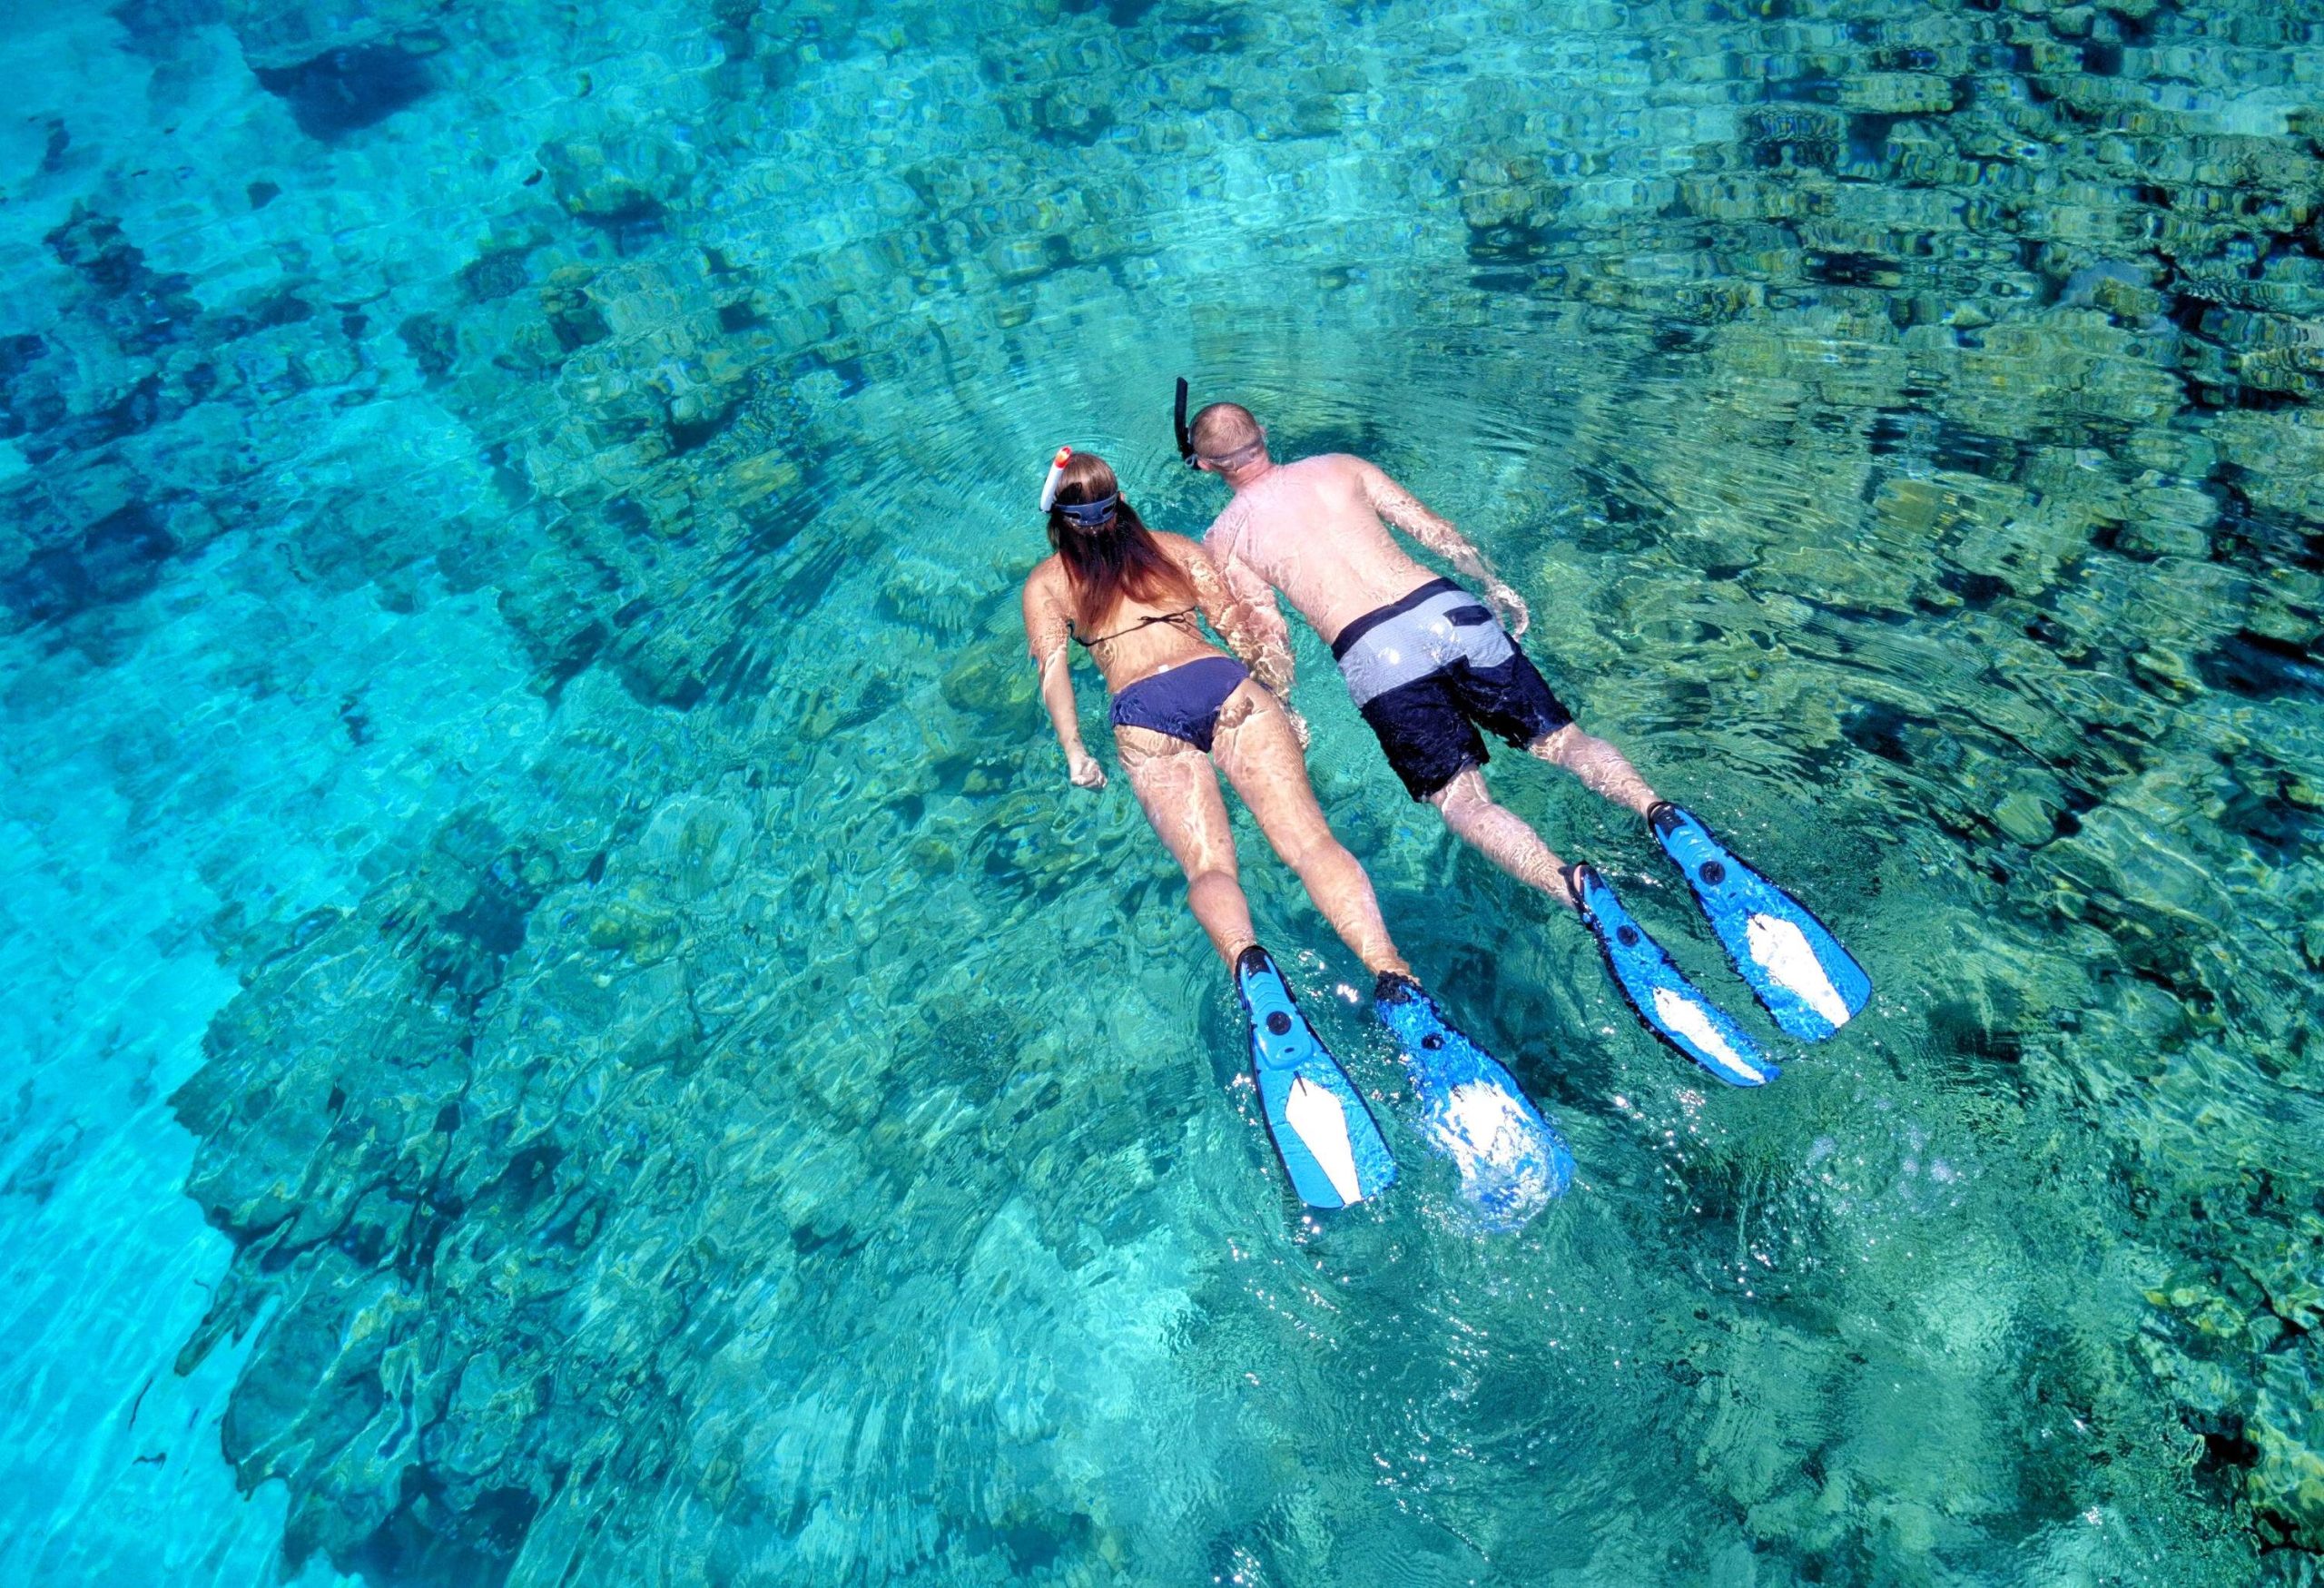 A couple in swim attire snorkels together across the clear ocean waters.